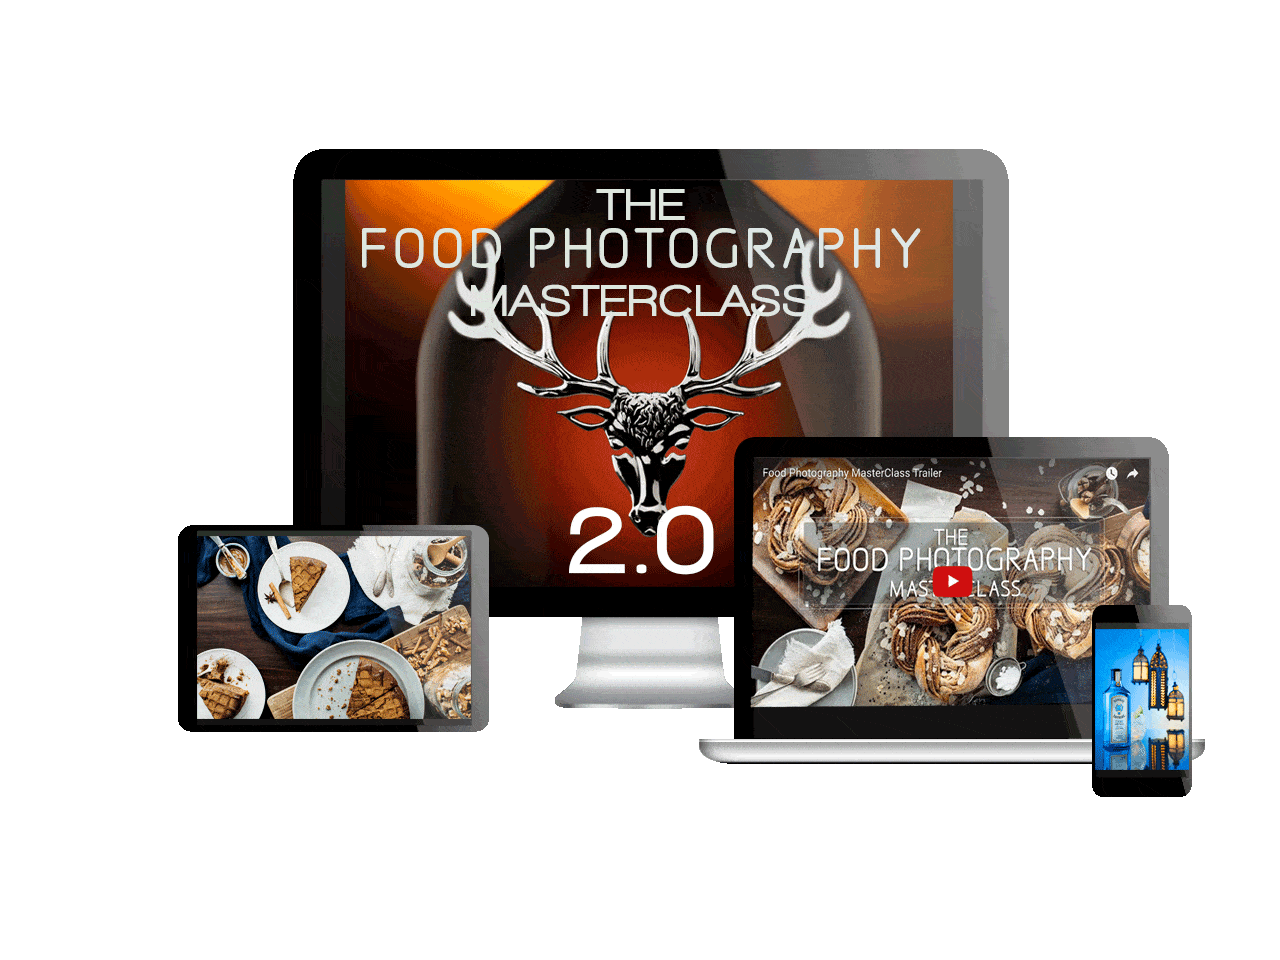 The Food Photography Masterclass